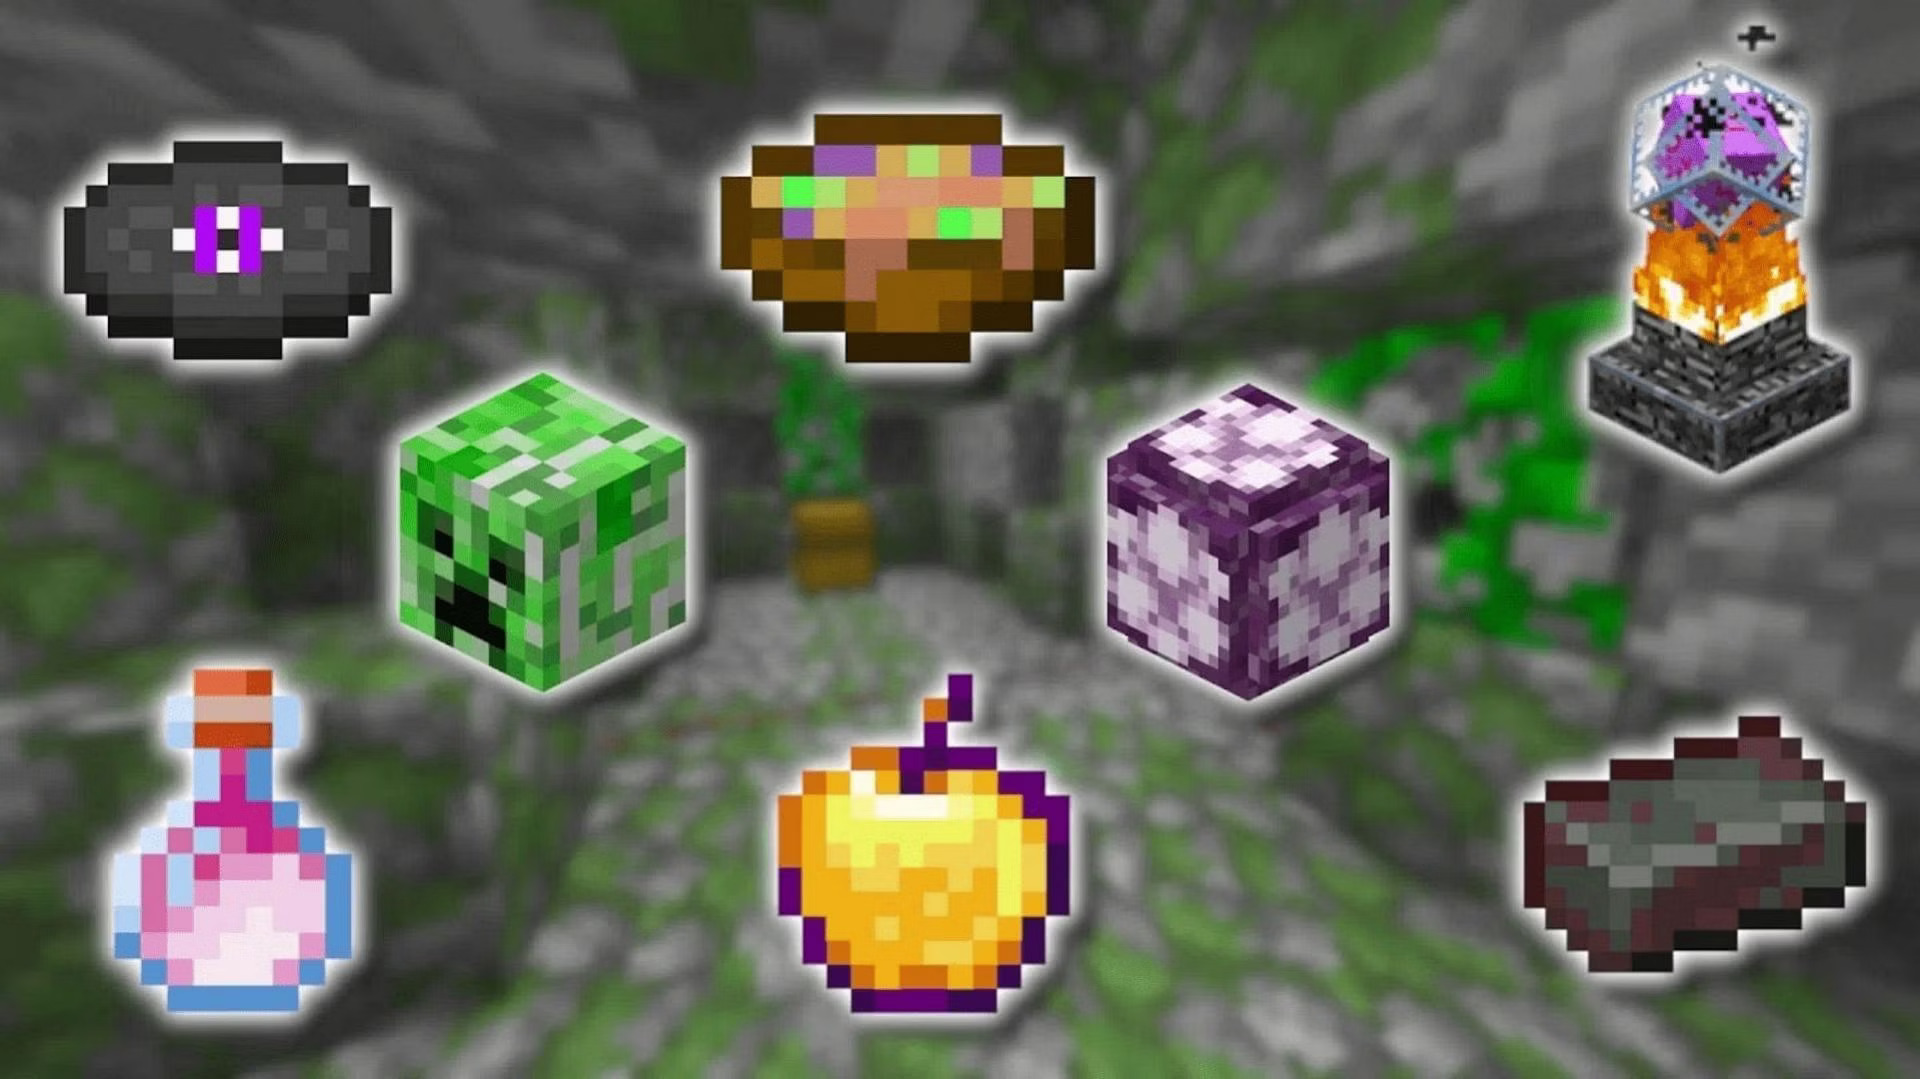 How many Item are useful in Minecraft?